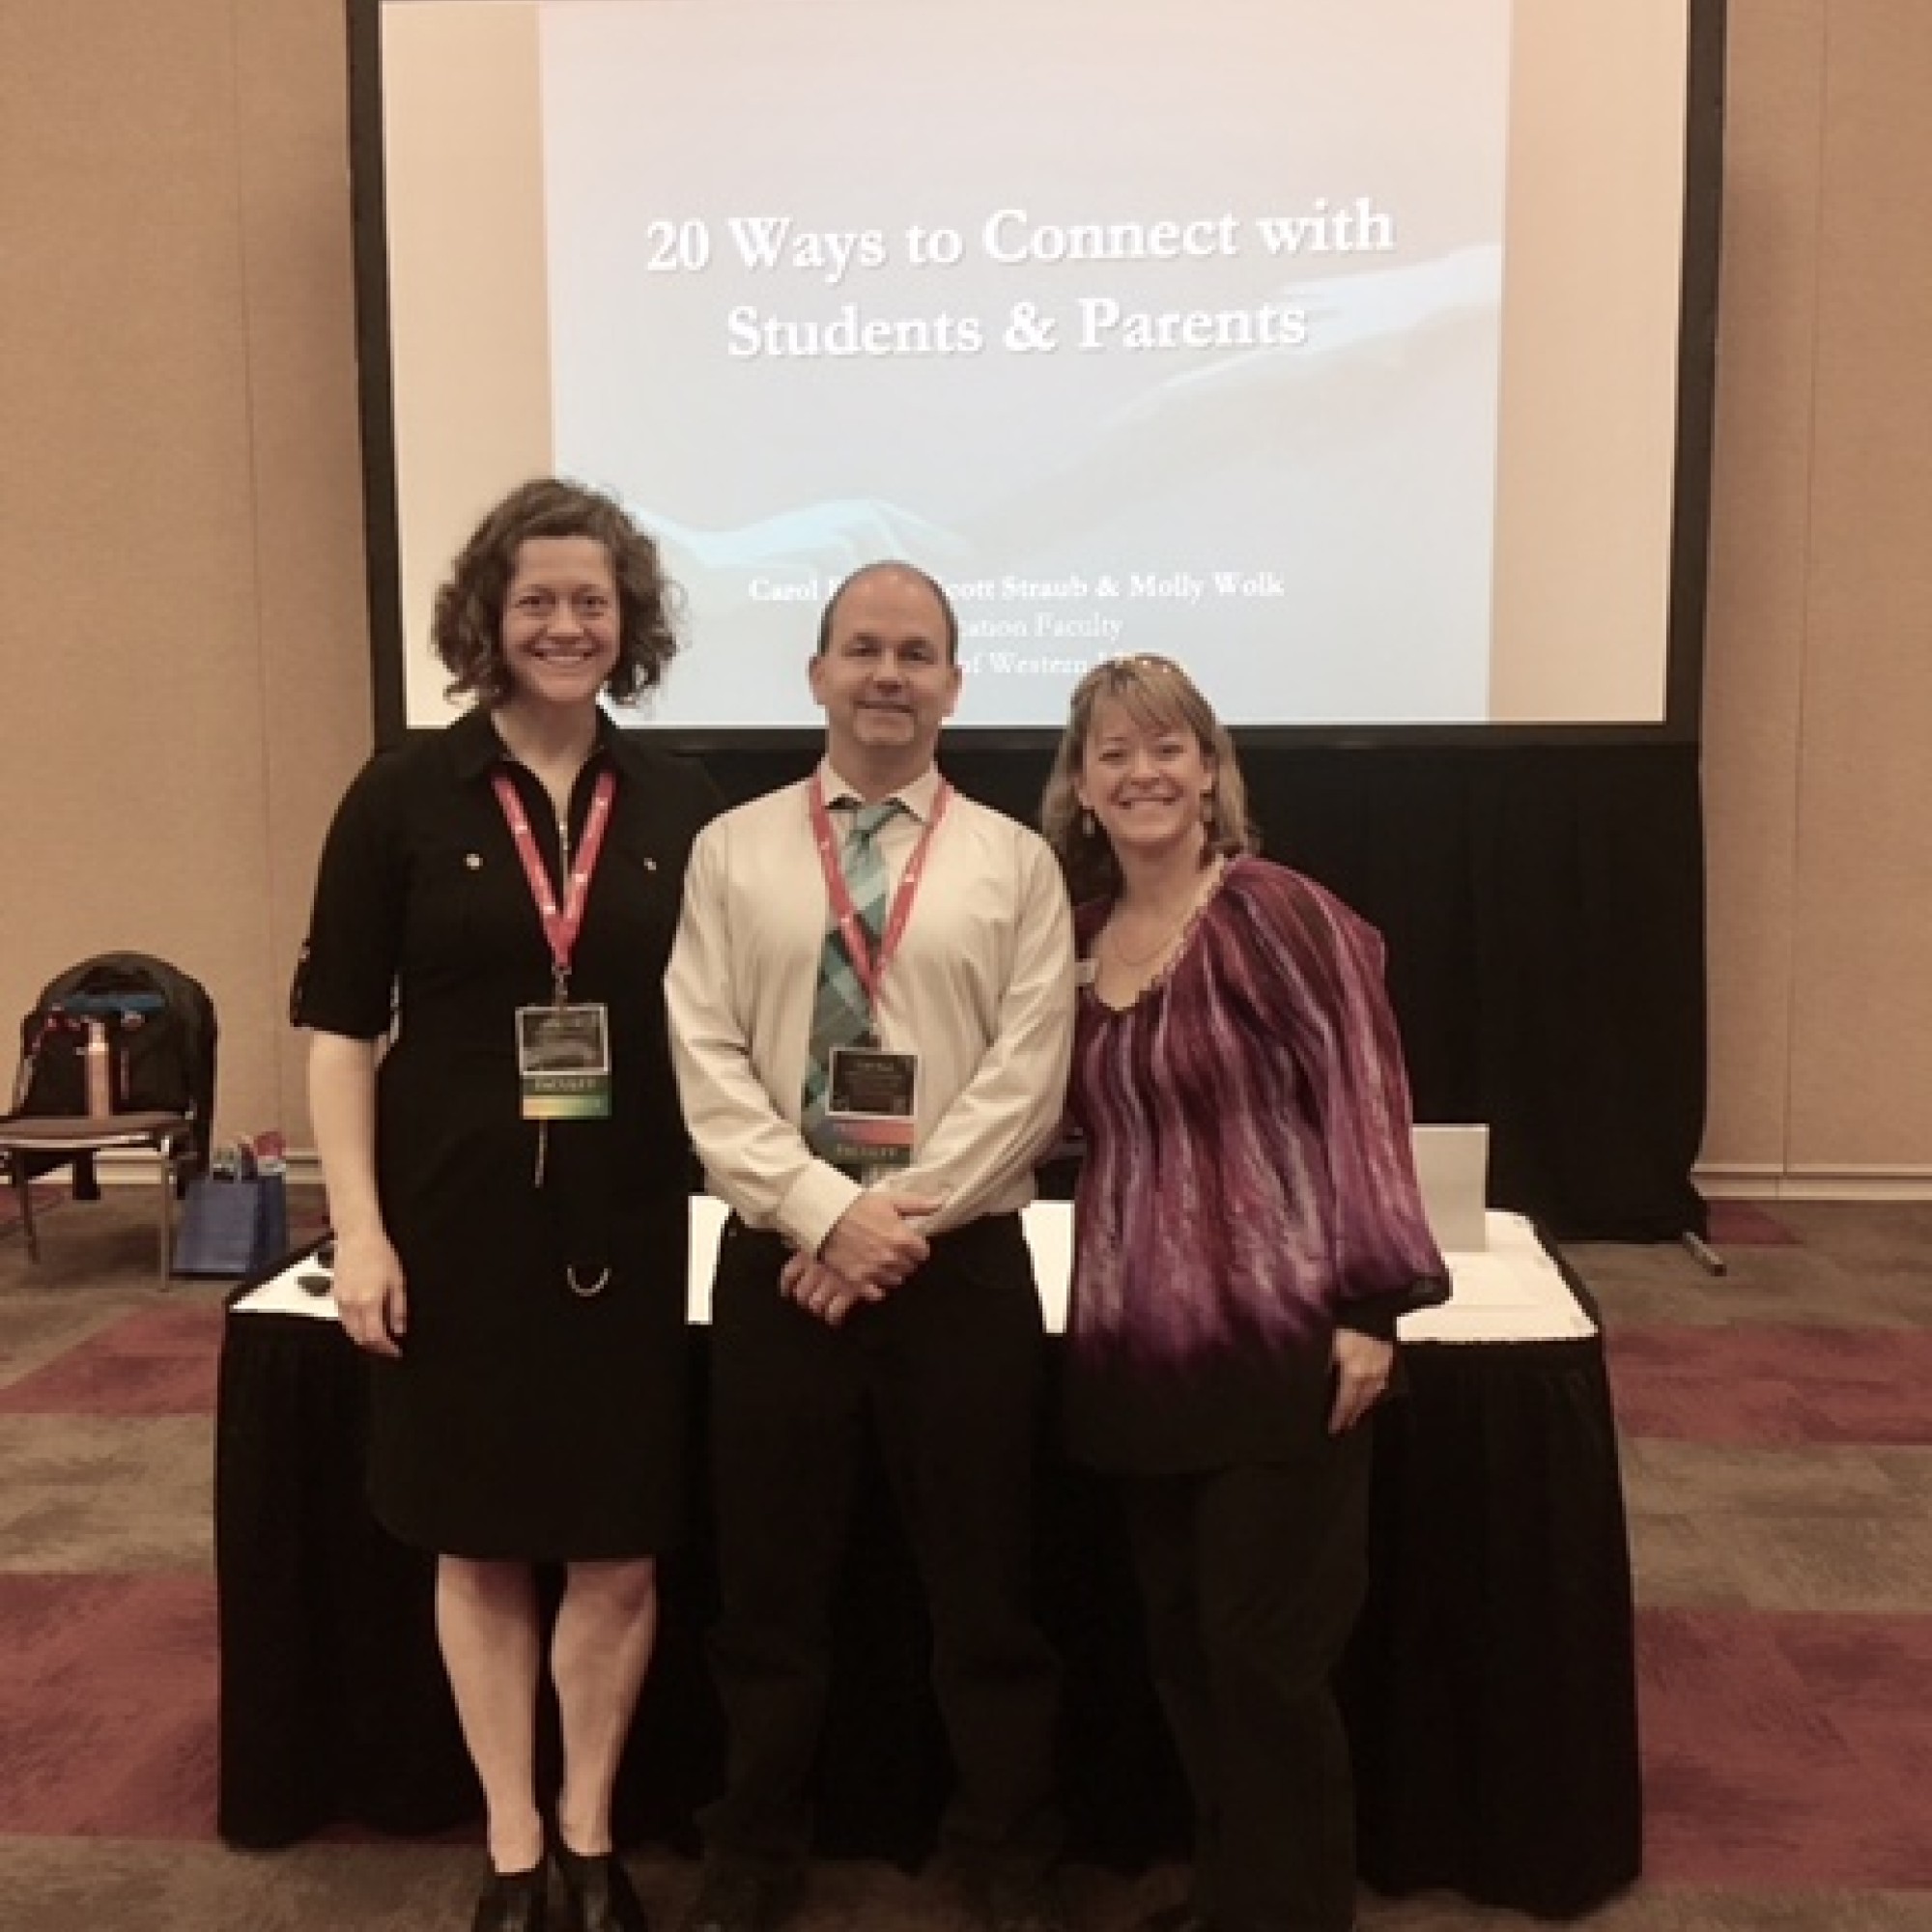 CWI Education instructors presented at the Federal Programs Conference